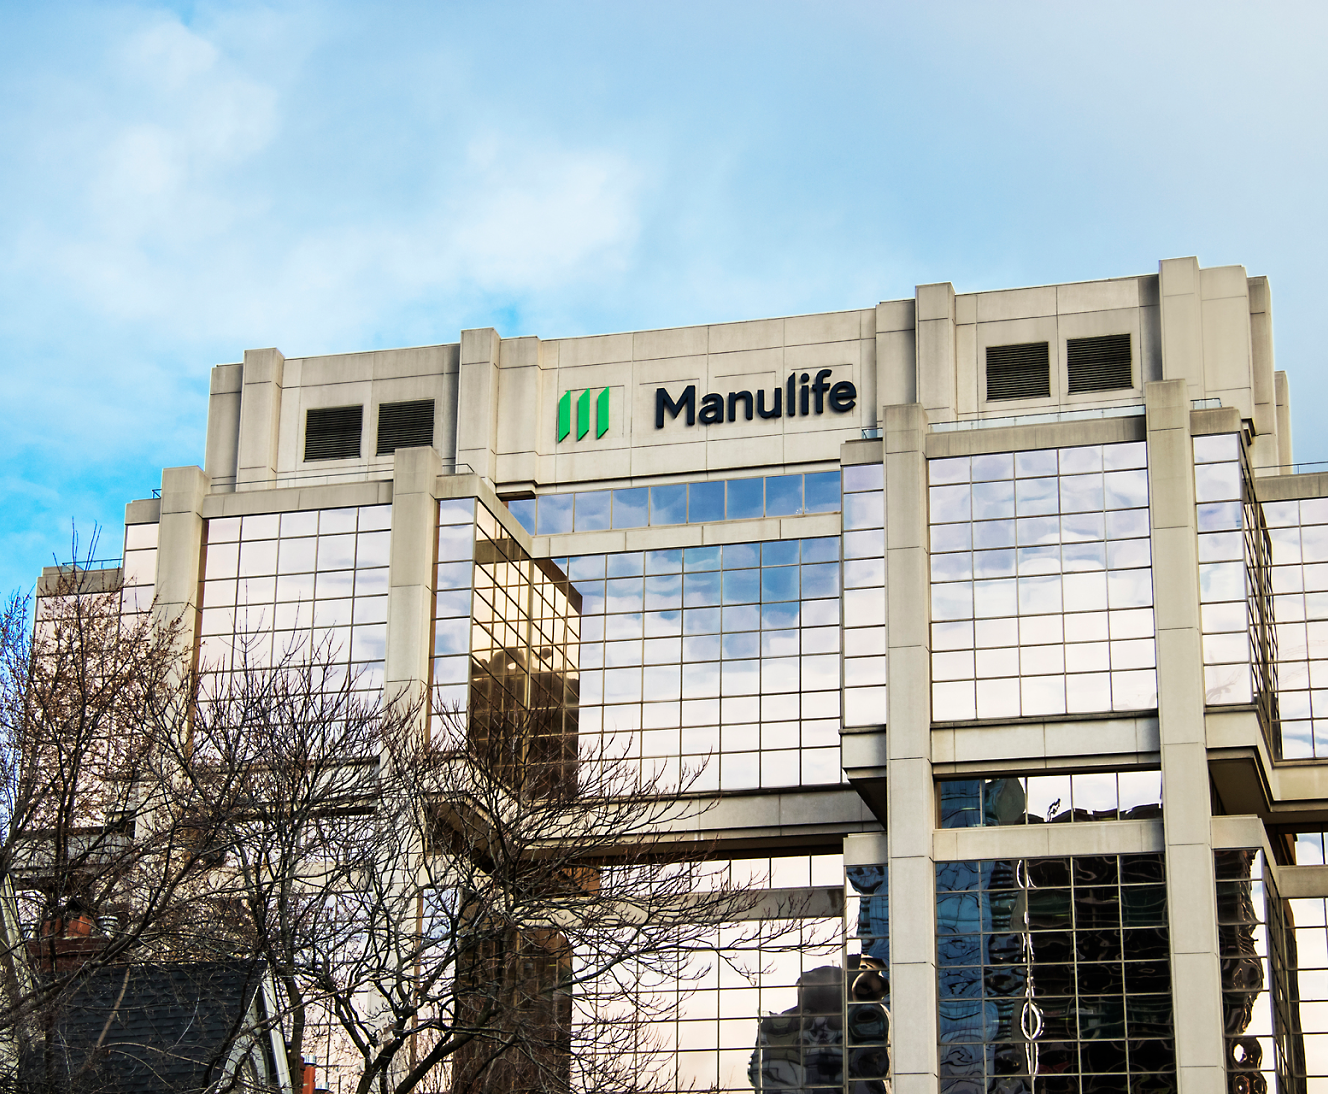 Exterior view of the manulife building with its logo, showcasing reflective glass windows and a modern architectural design.